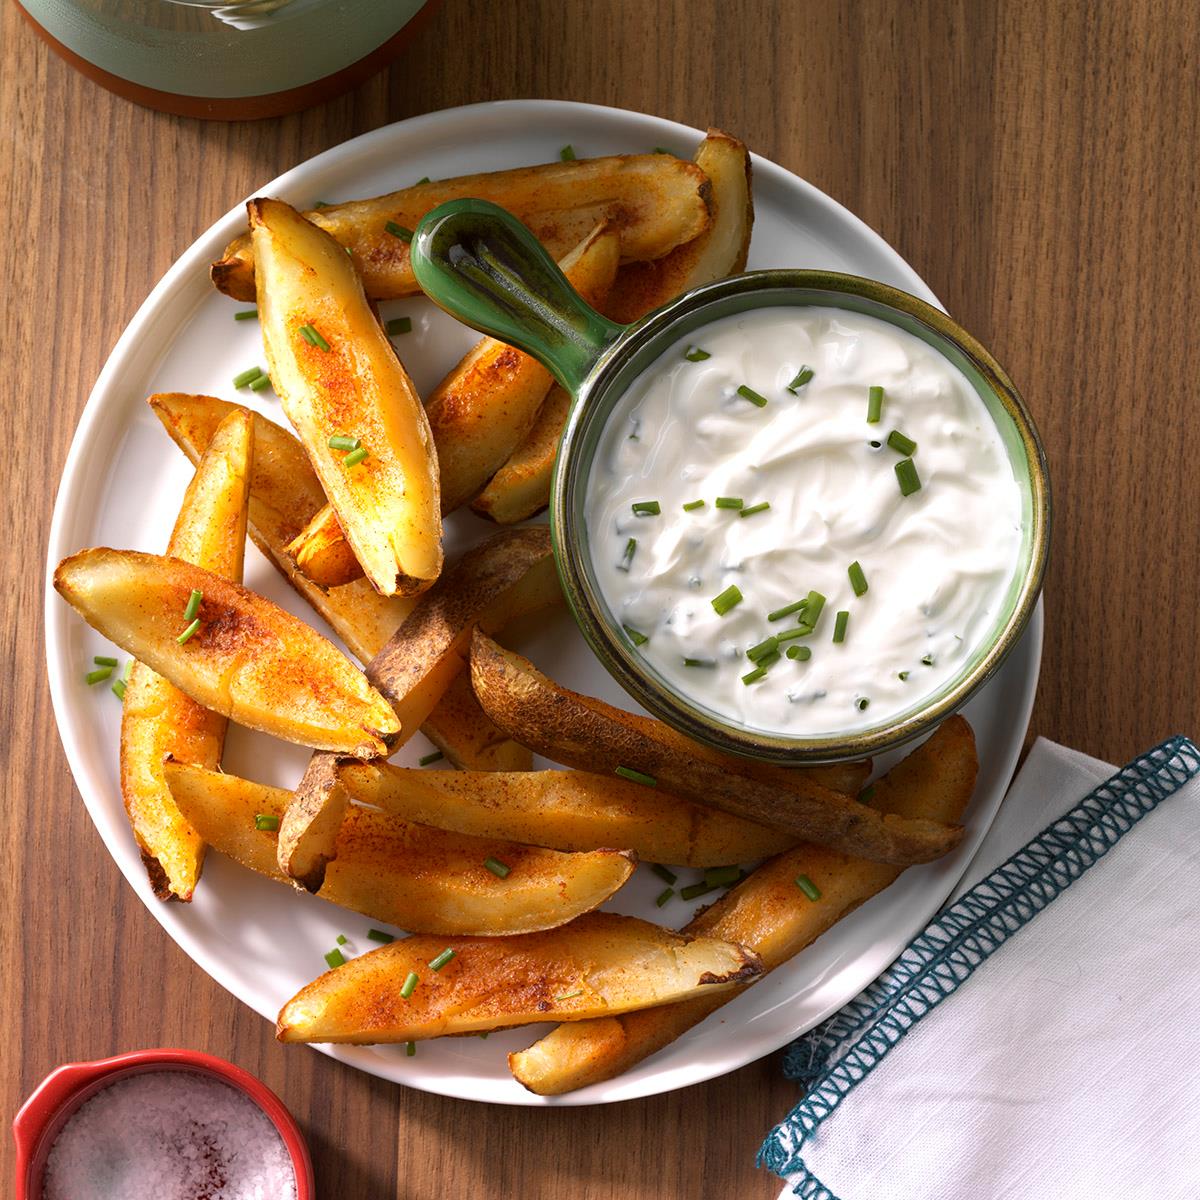 For a simple hot snack that really hits the spot on a cool fall evening, put together a plate of these crisp potato skins. —Andrea Holcomb, Torrington, Connecticut <a href="https://www.tasteofhome.com/recipes/savory-potato-skins/">Get Recipe</a>